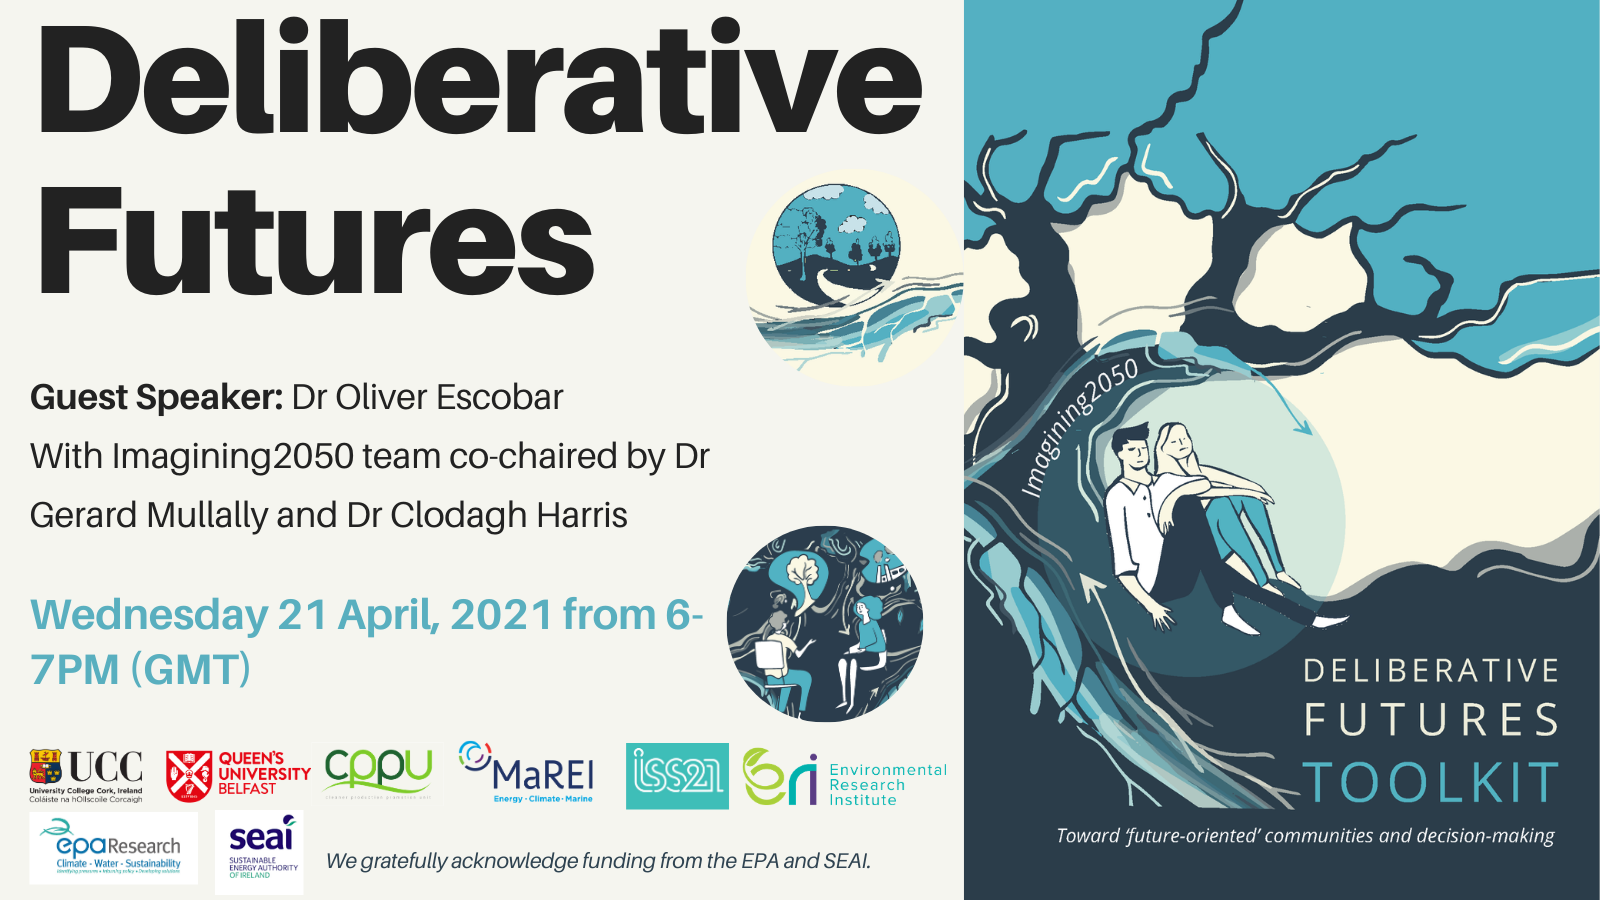 'Deliberative Futures' Toolkit Launch with Guest Speaker Dr Oliver Escobar
